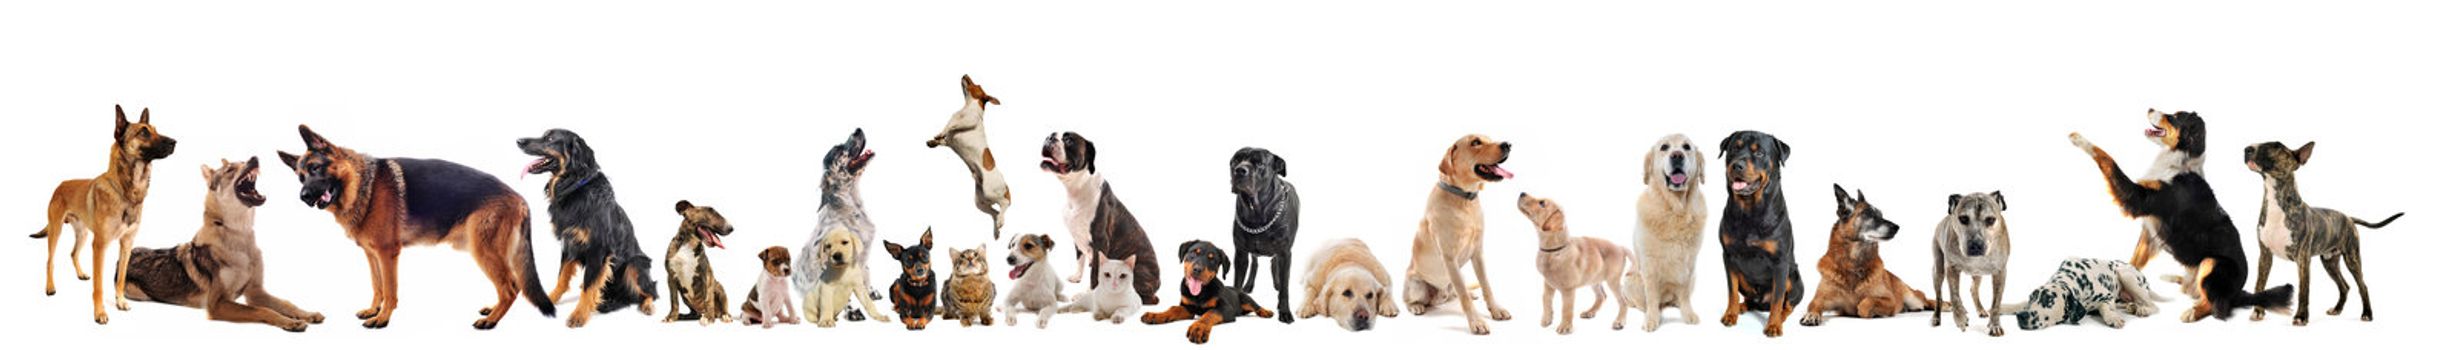 group of dogs, puppies and cats on a white background